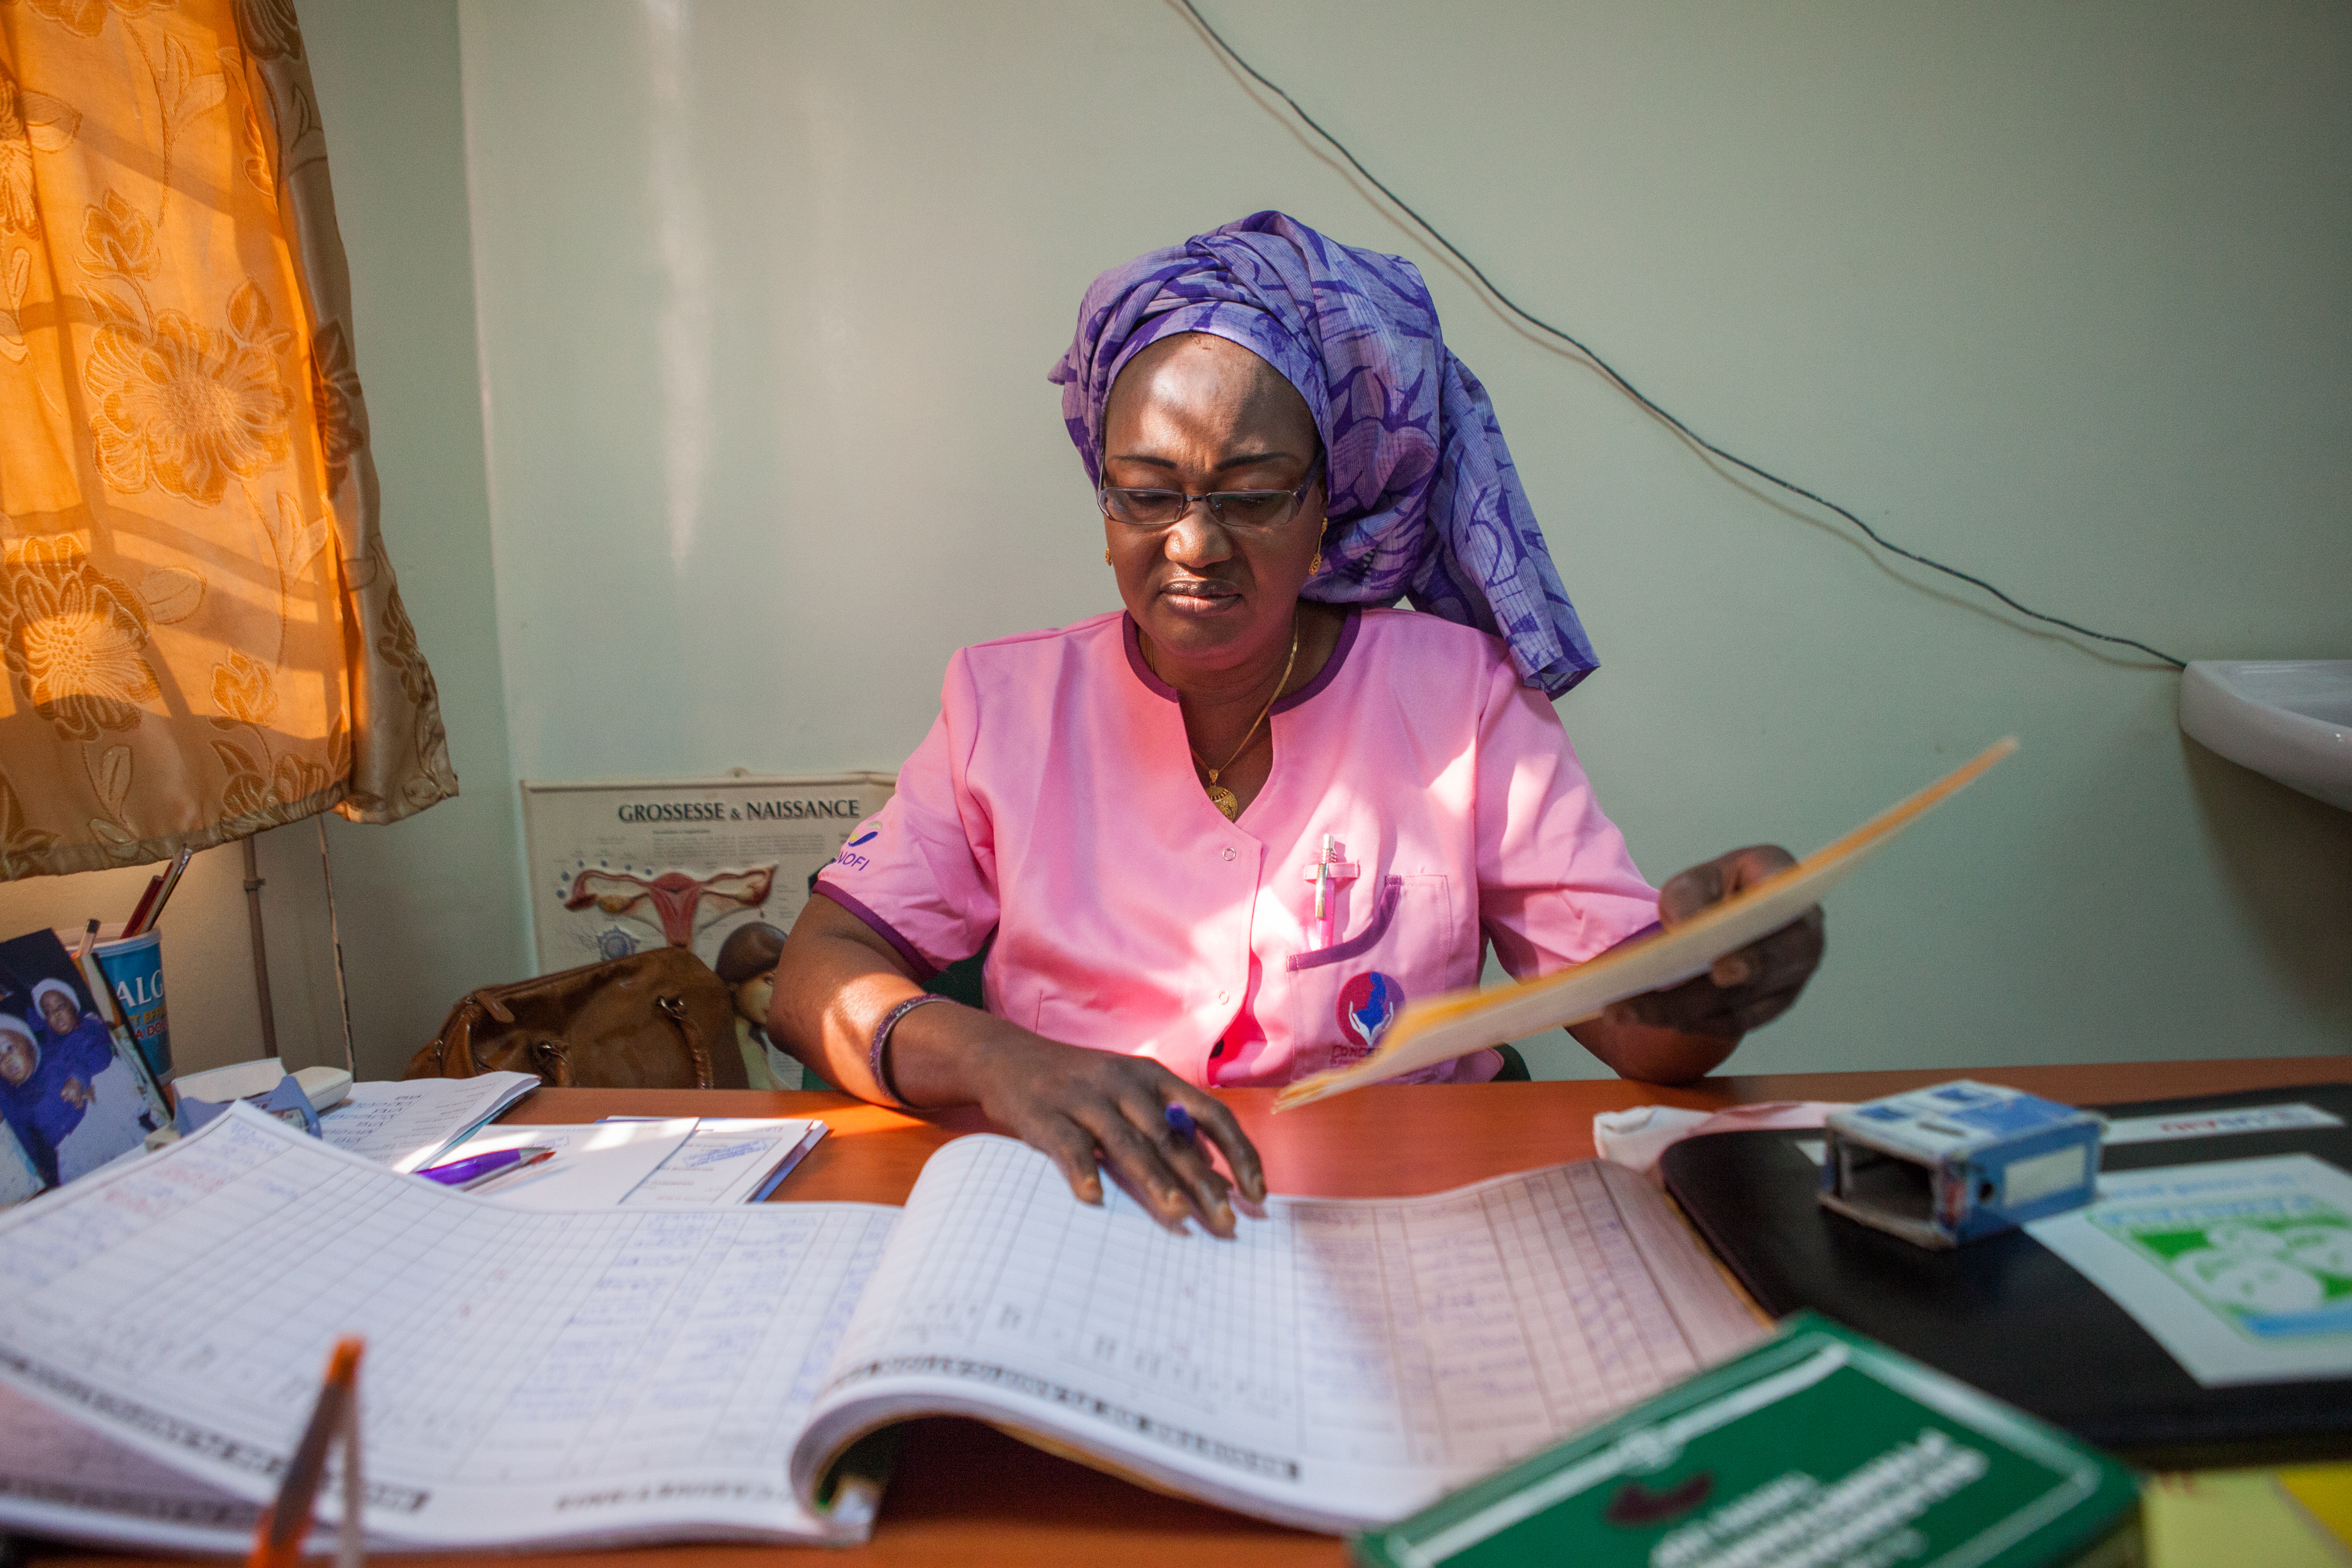 A midwife looks through records at a Health Center in Senegal.